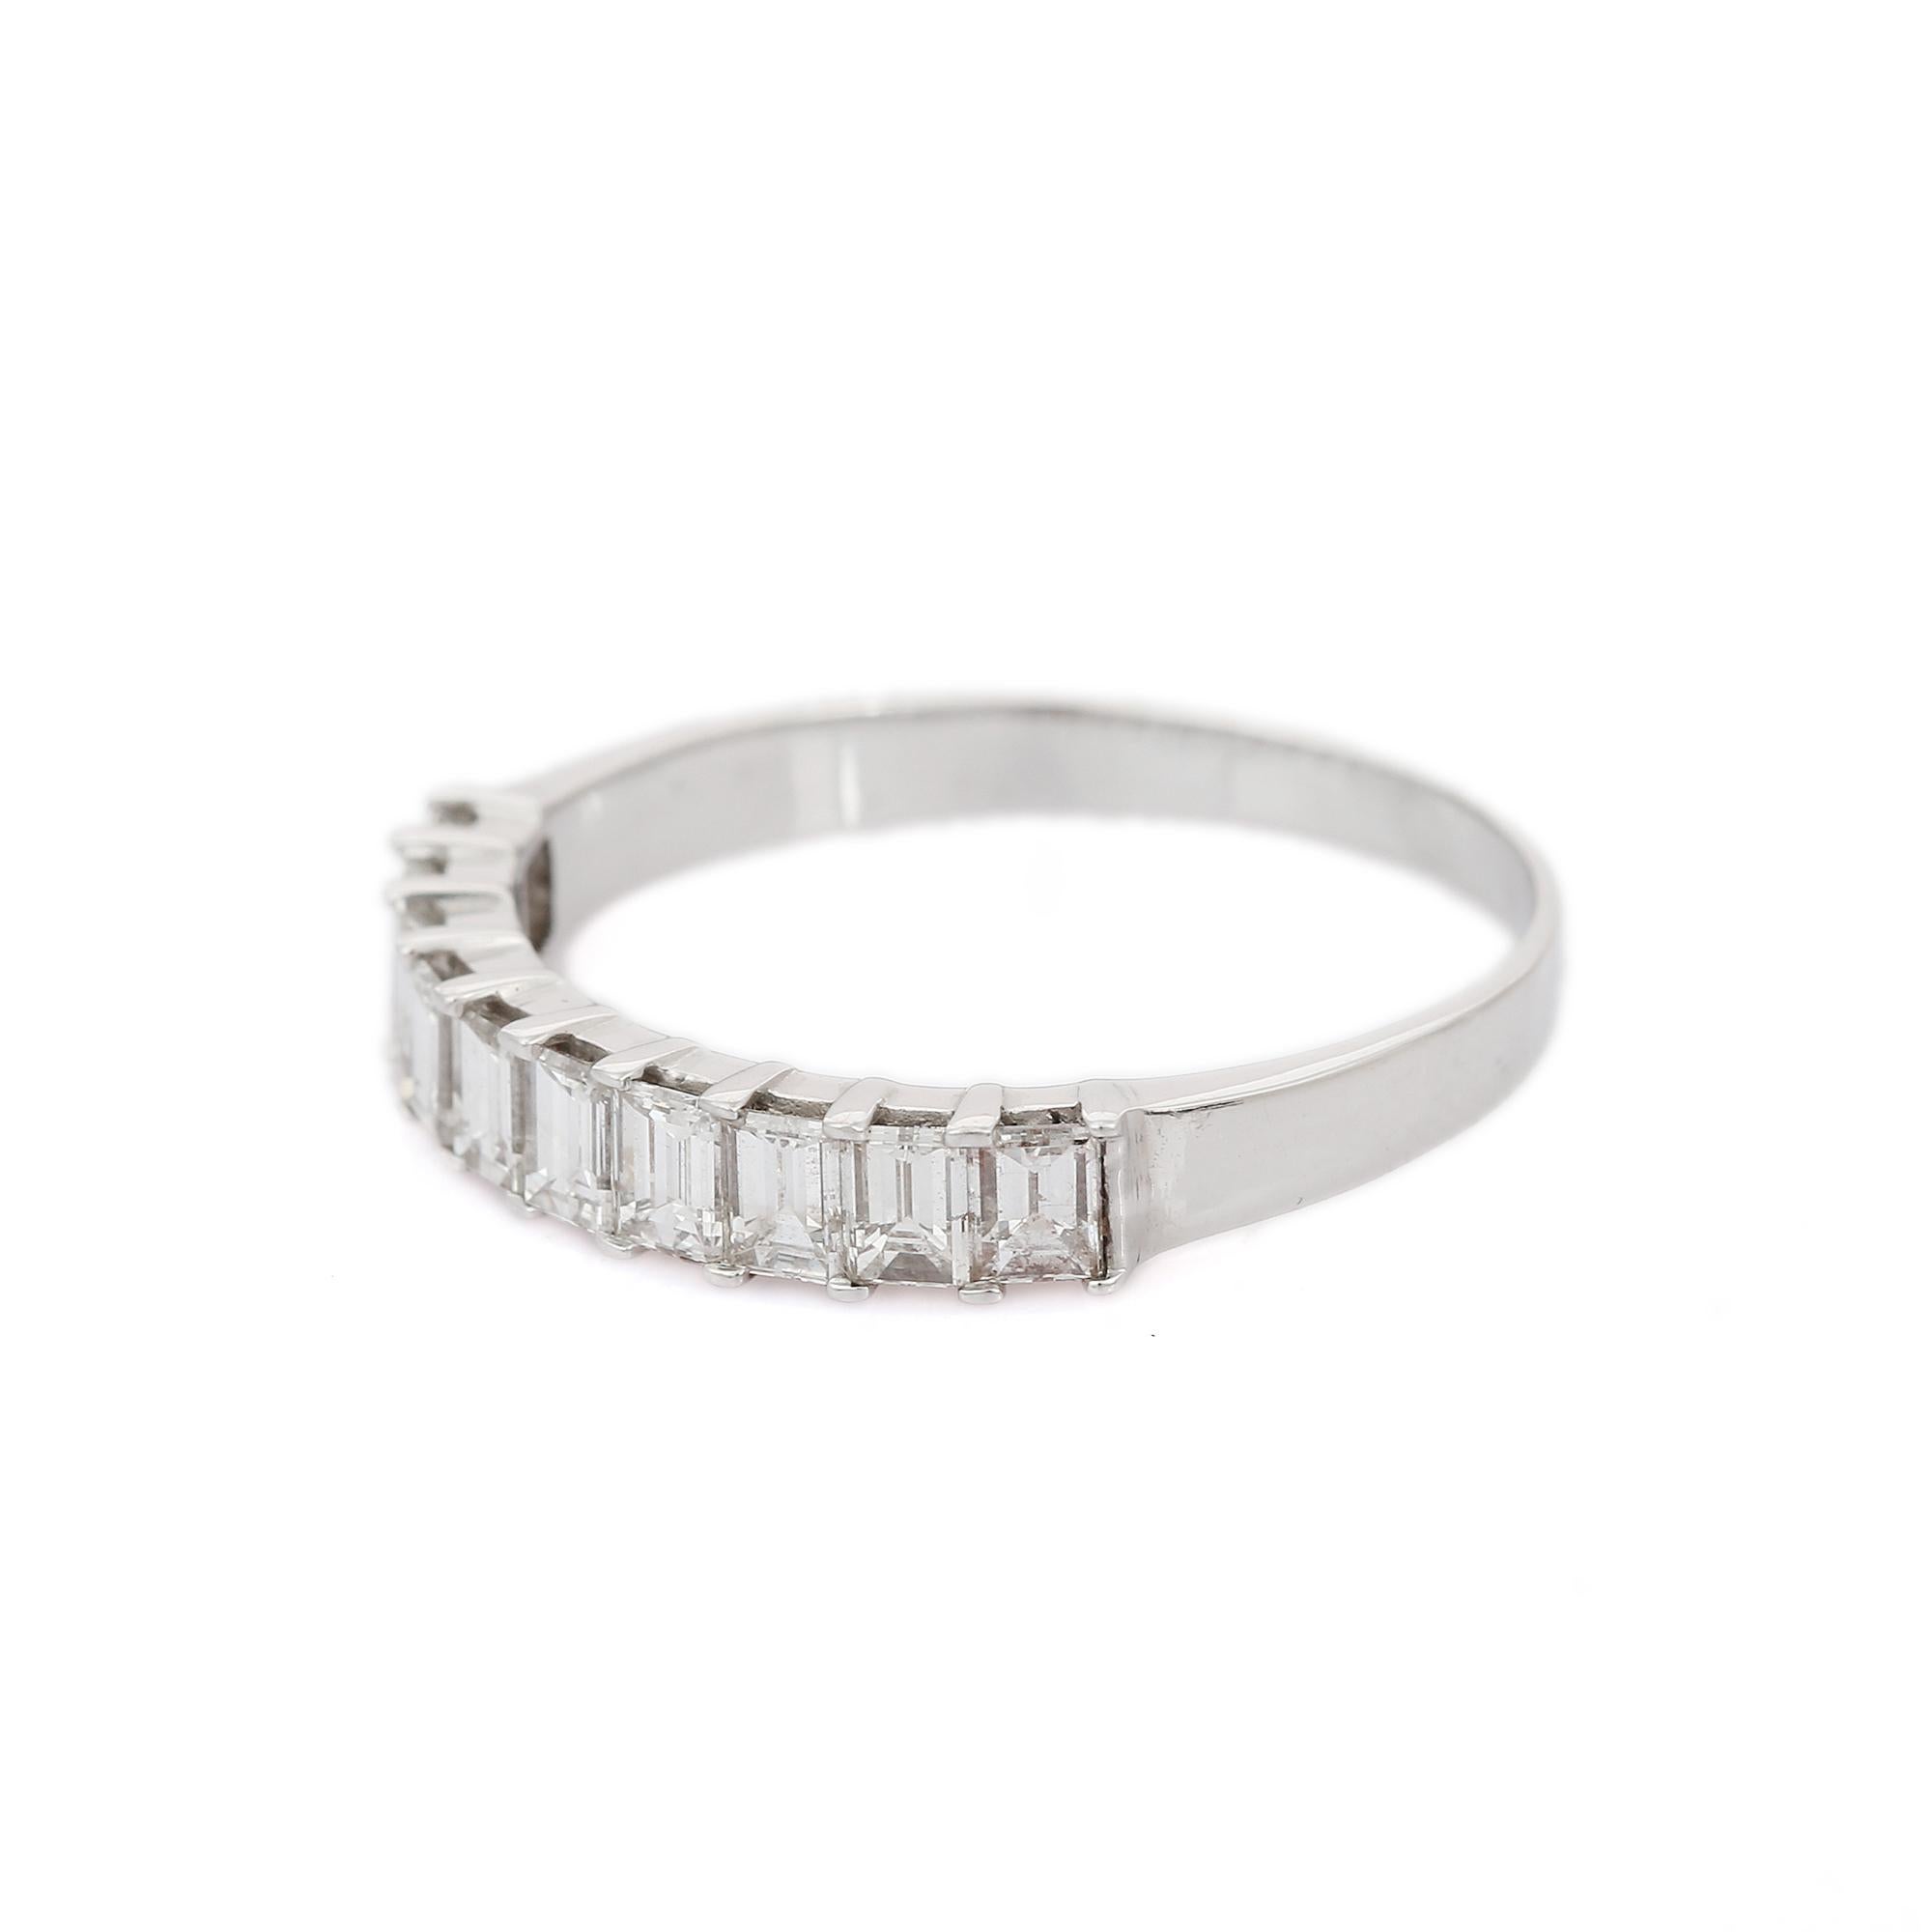 For Sale:  1.25 Carat Emerald Cut Diamond Half Eternity Band Ring in 18K White Gold  6